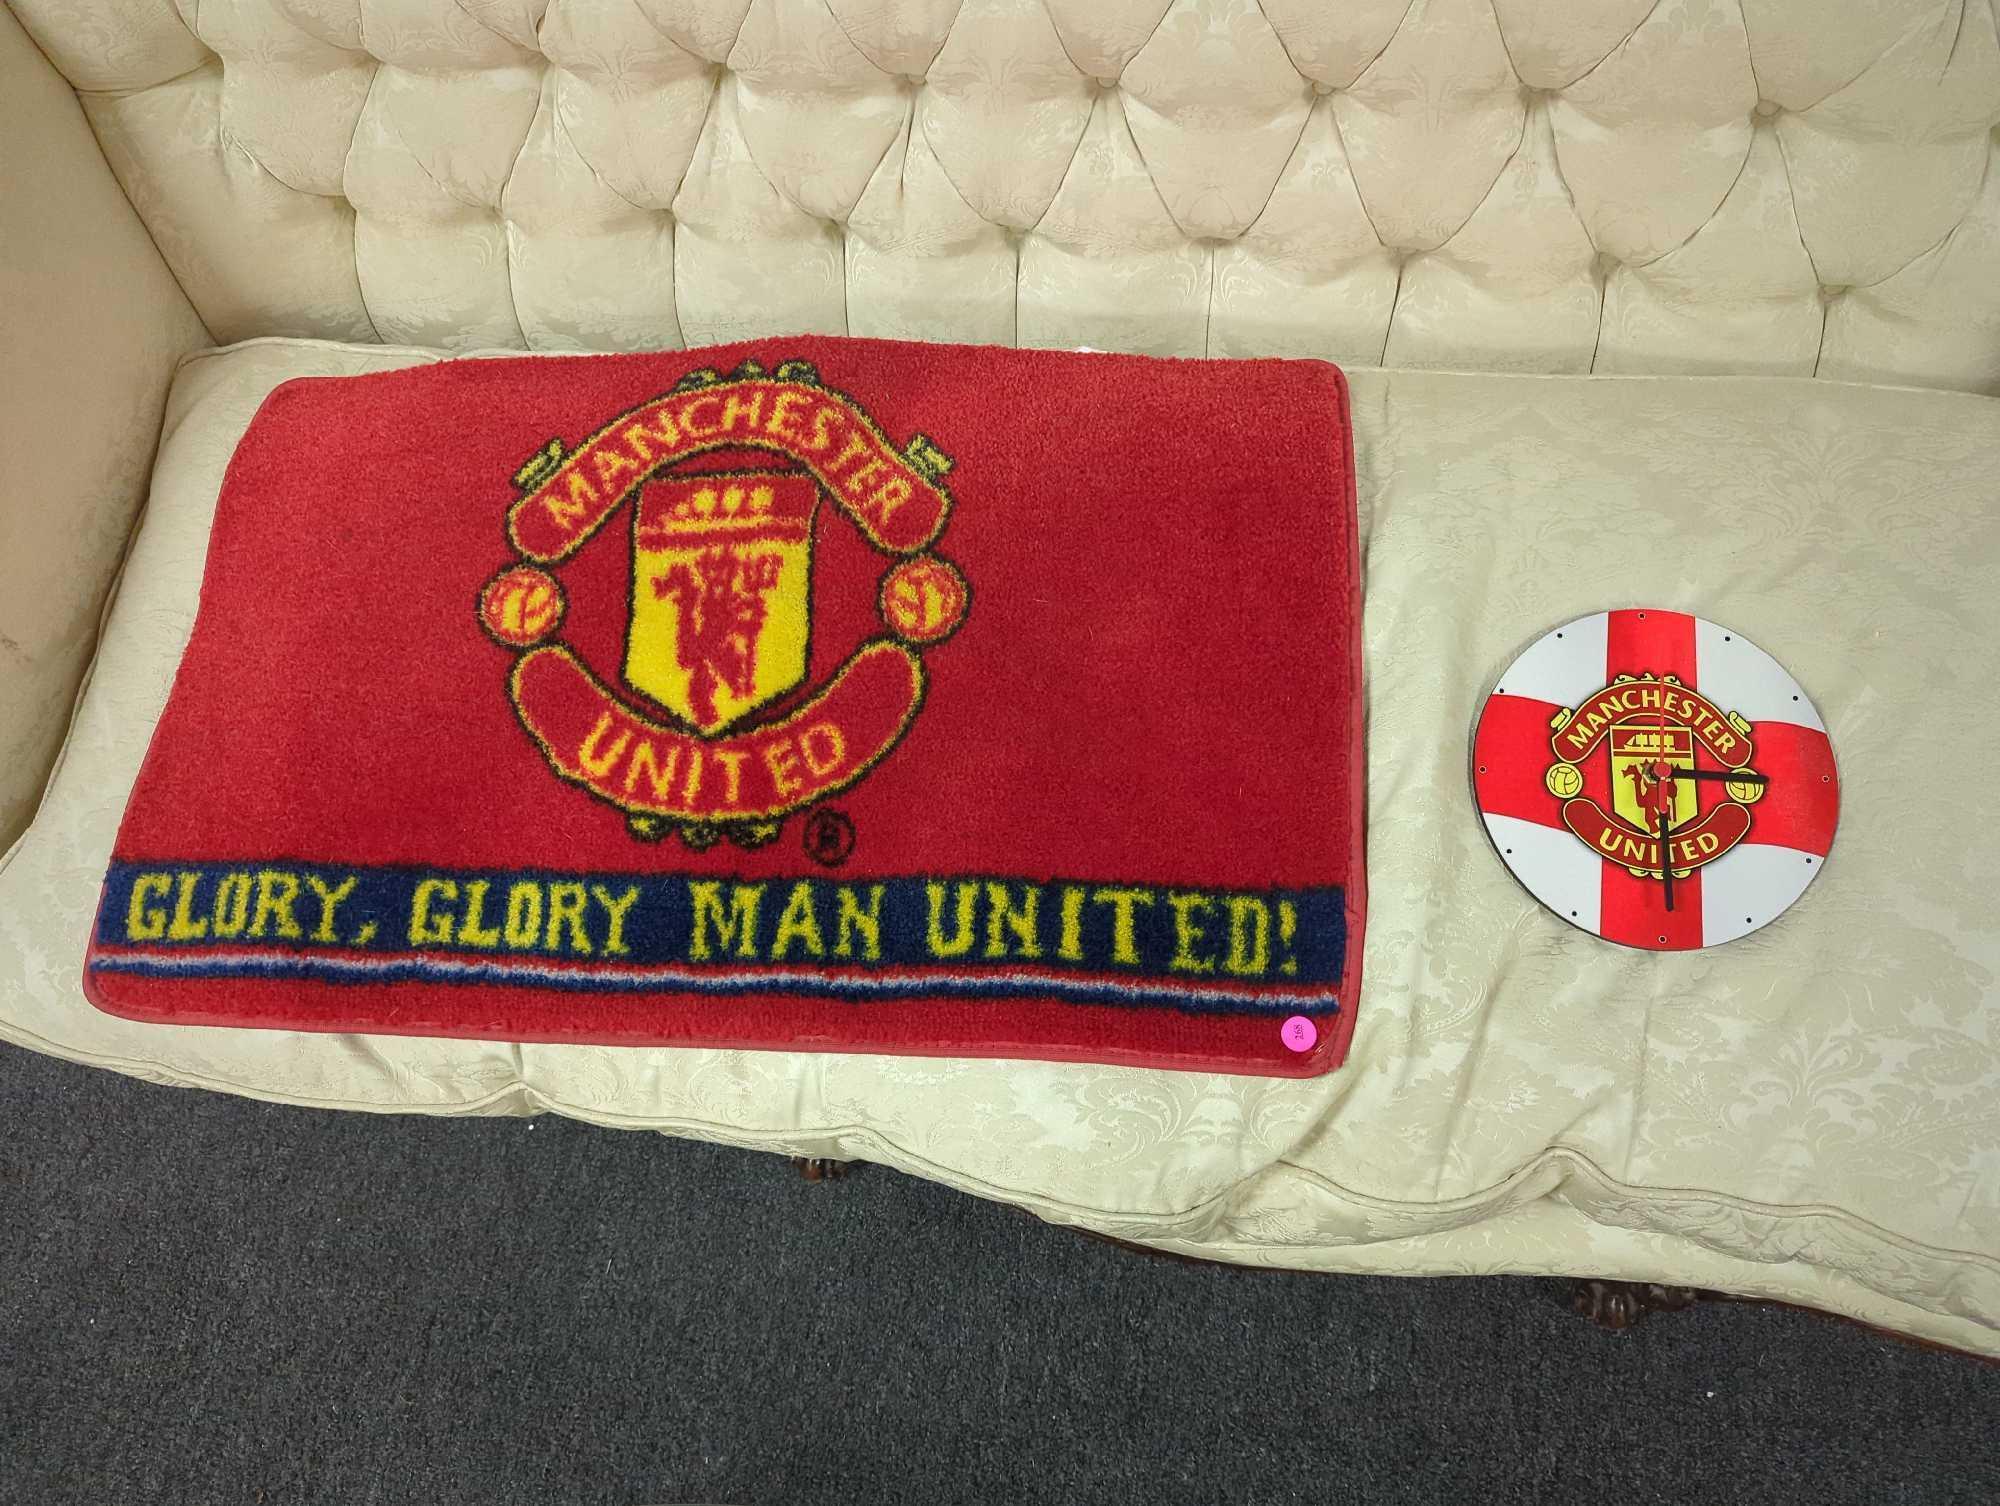 Manchester United bath mat (31"W x 19.5"H) and 8" matching wall clock. Comes as is shown in photos.